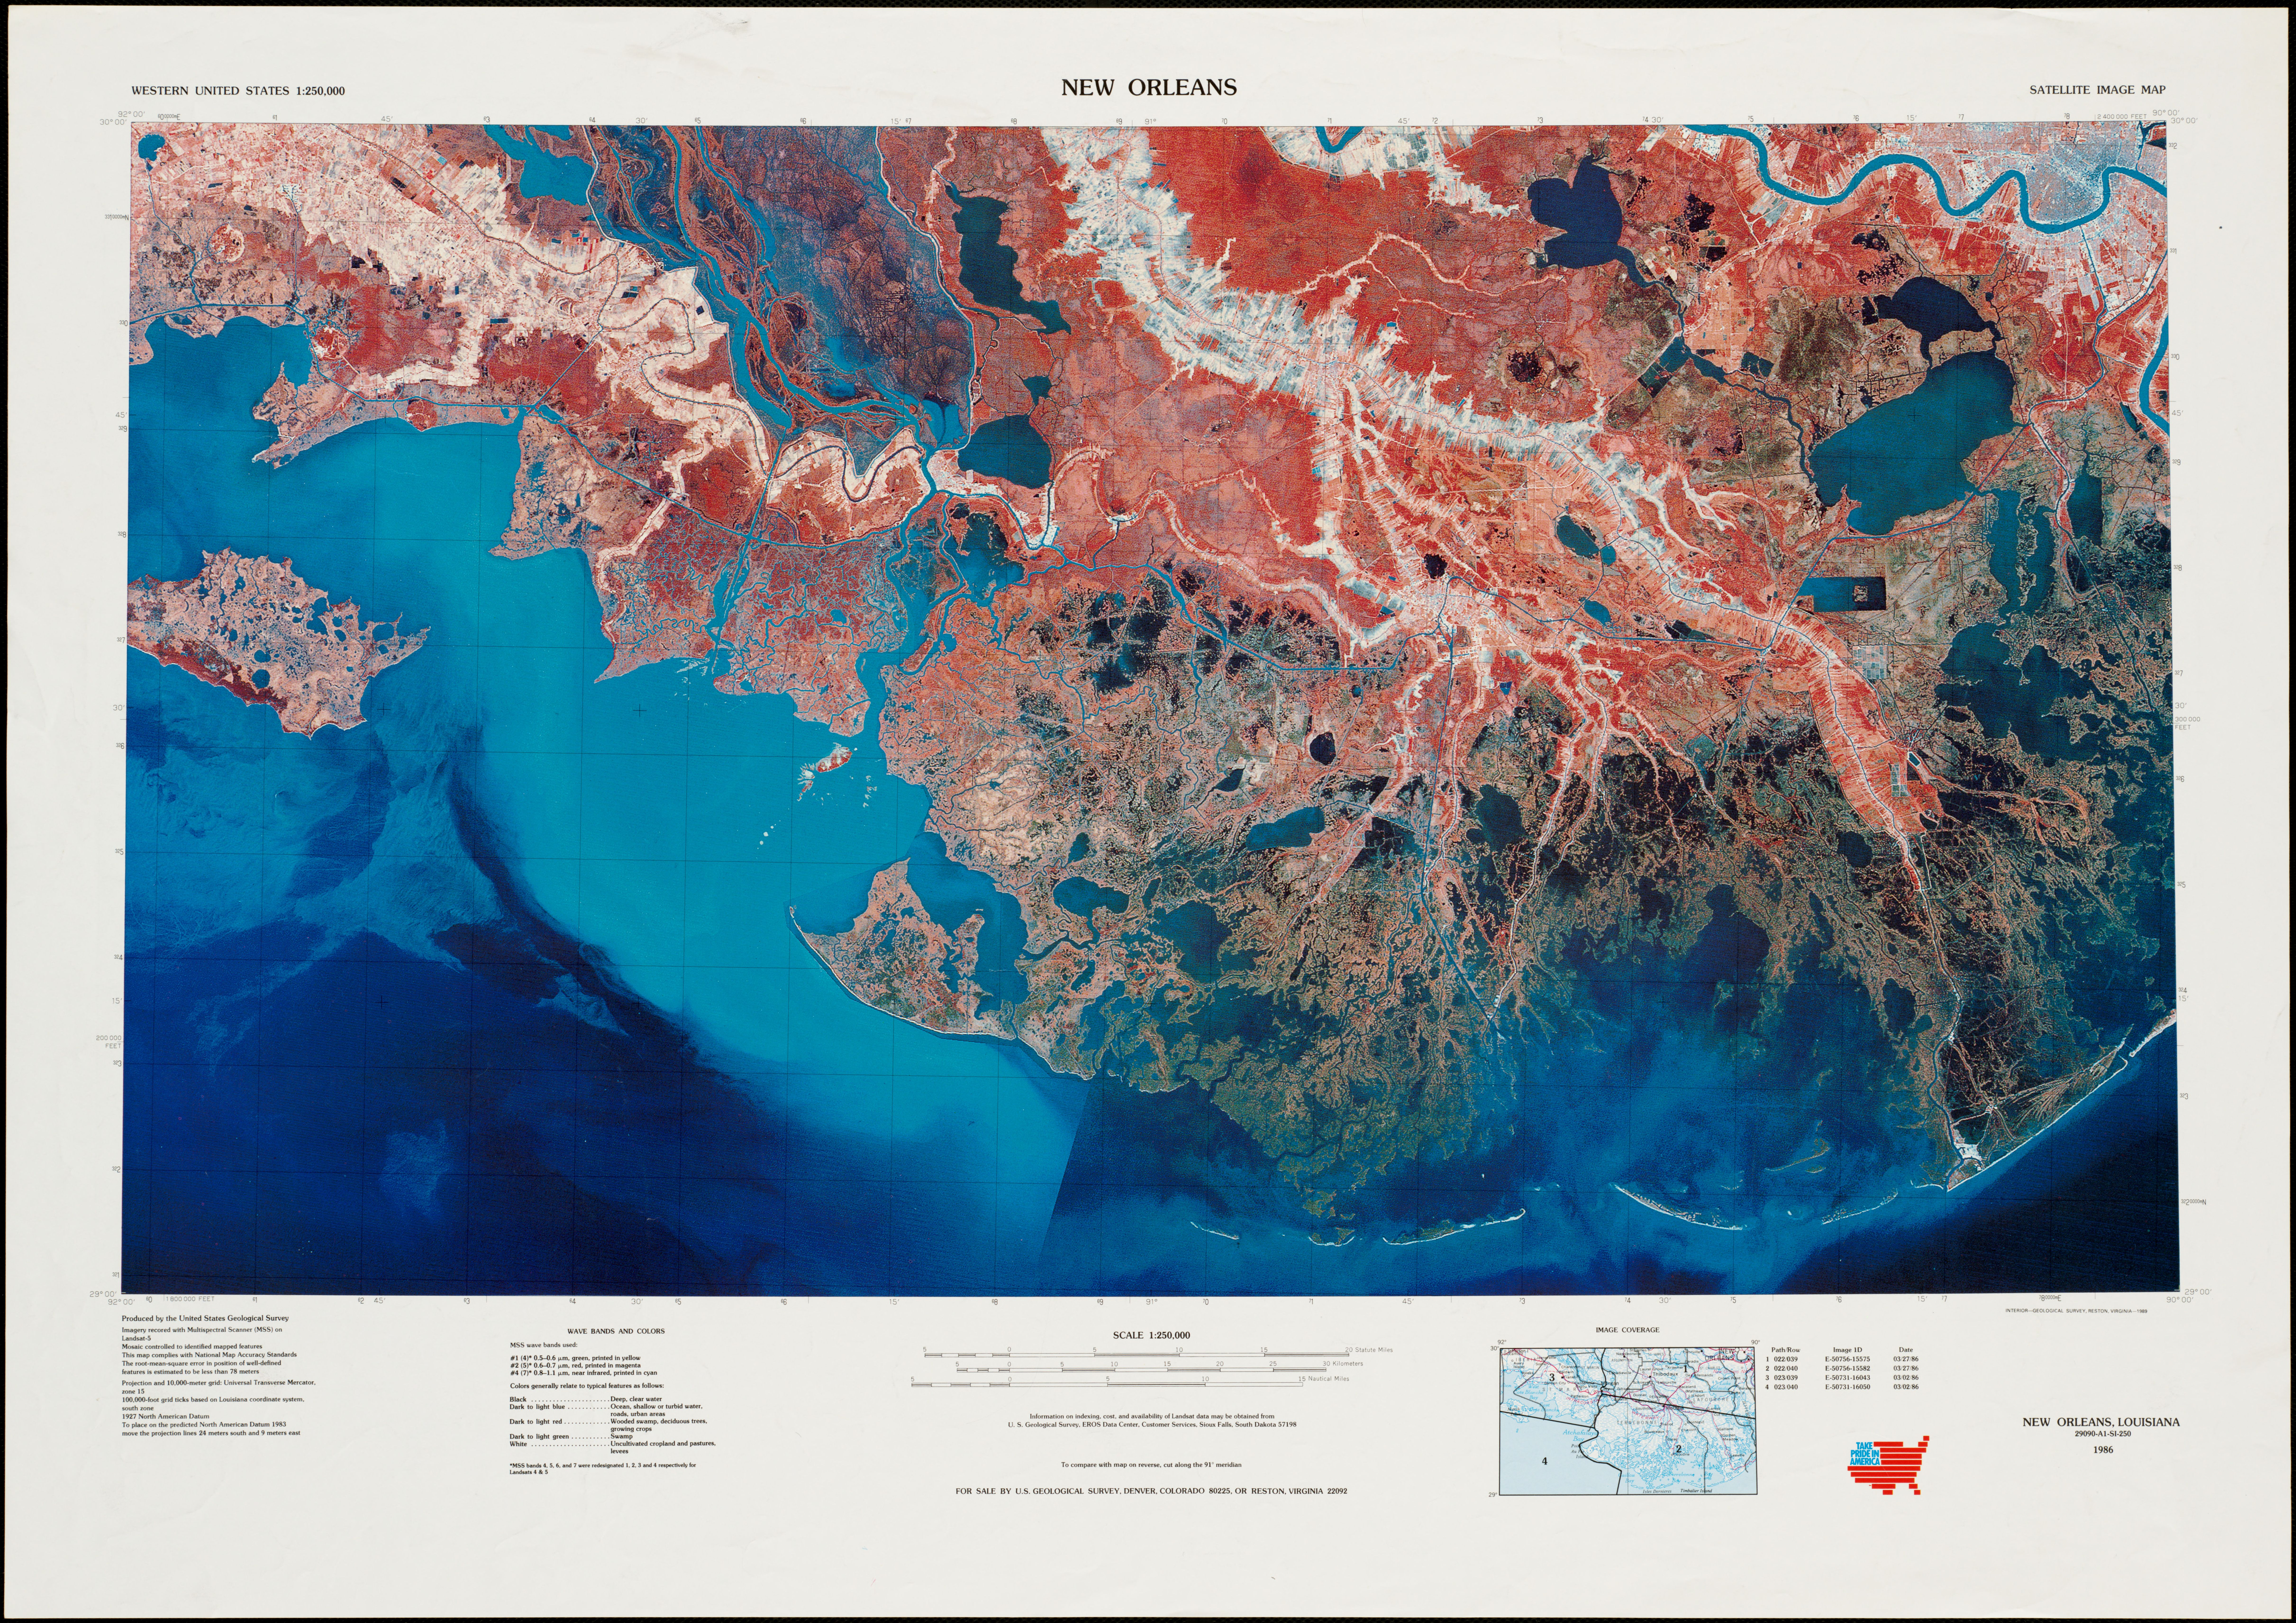 A 1986 topographic-bathymetric map of New Orleans, created with Landsat-5 MSS imagery by the USGS